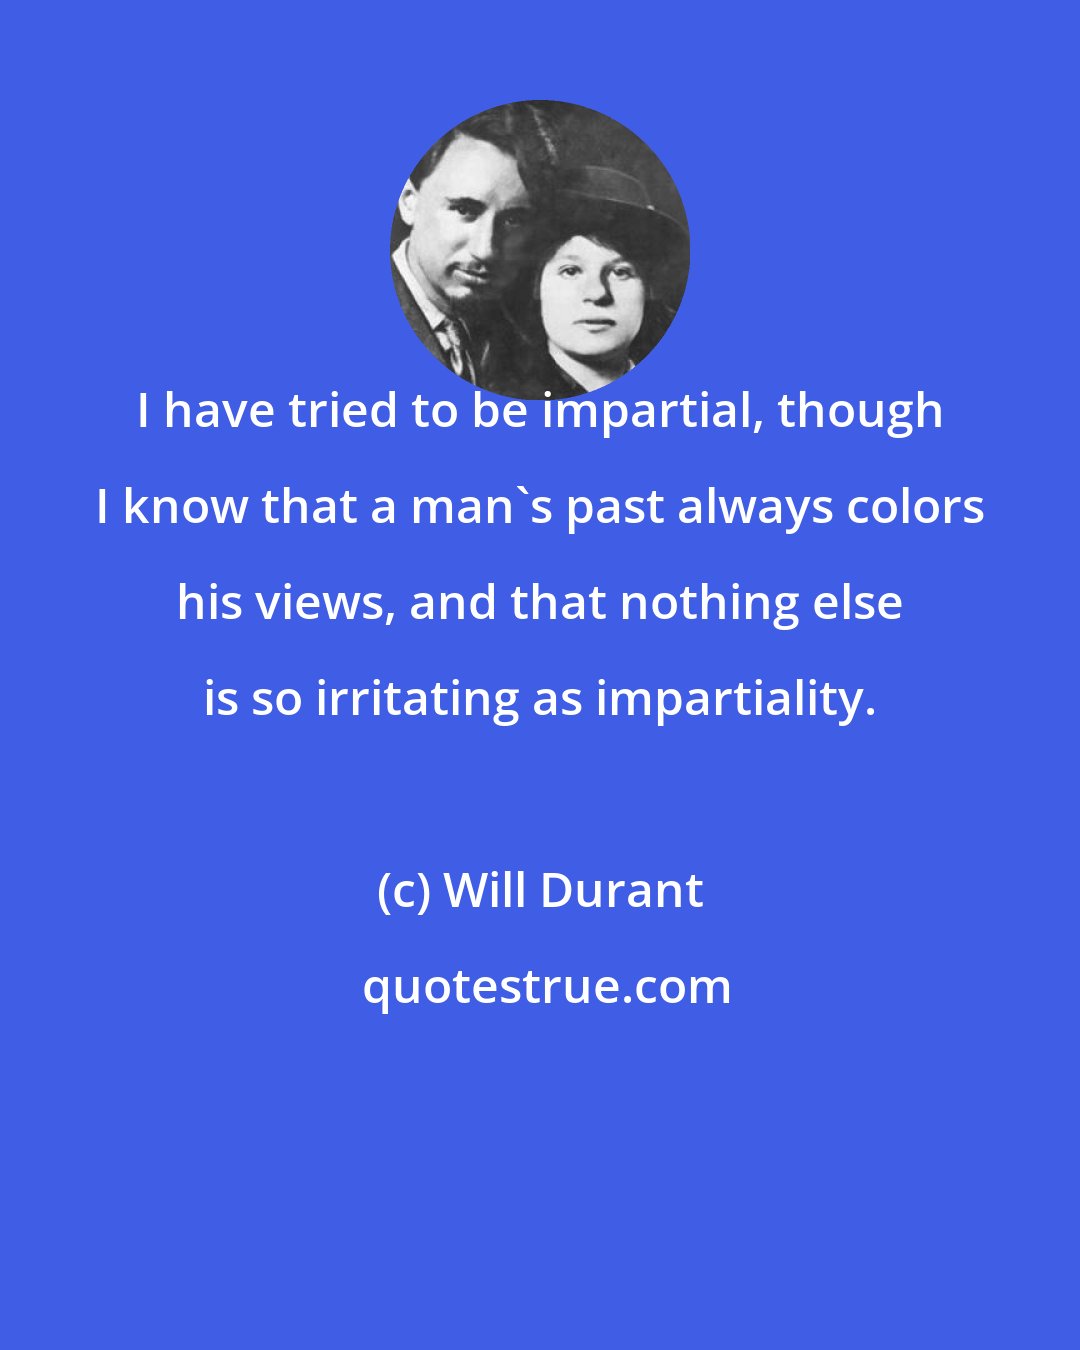 Will Durant: I have tried to be impartial, though I know that a man's past always colors his views, and that nothing else is so irritating as impartiality.